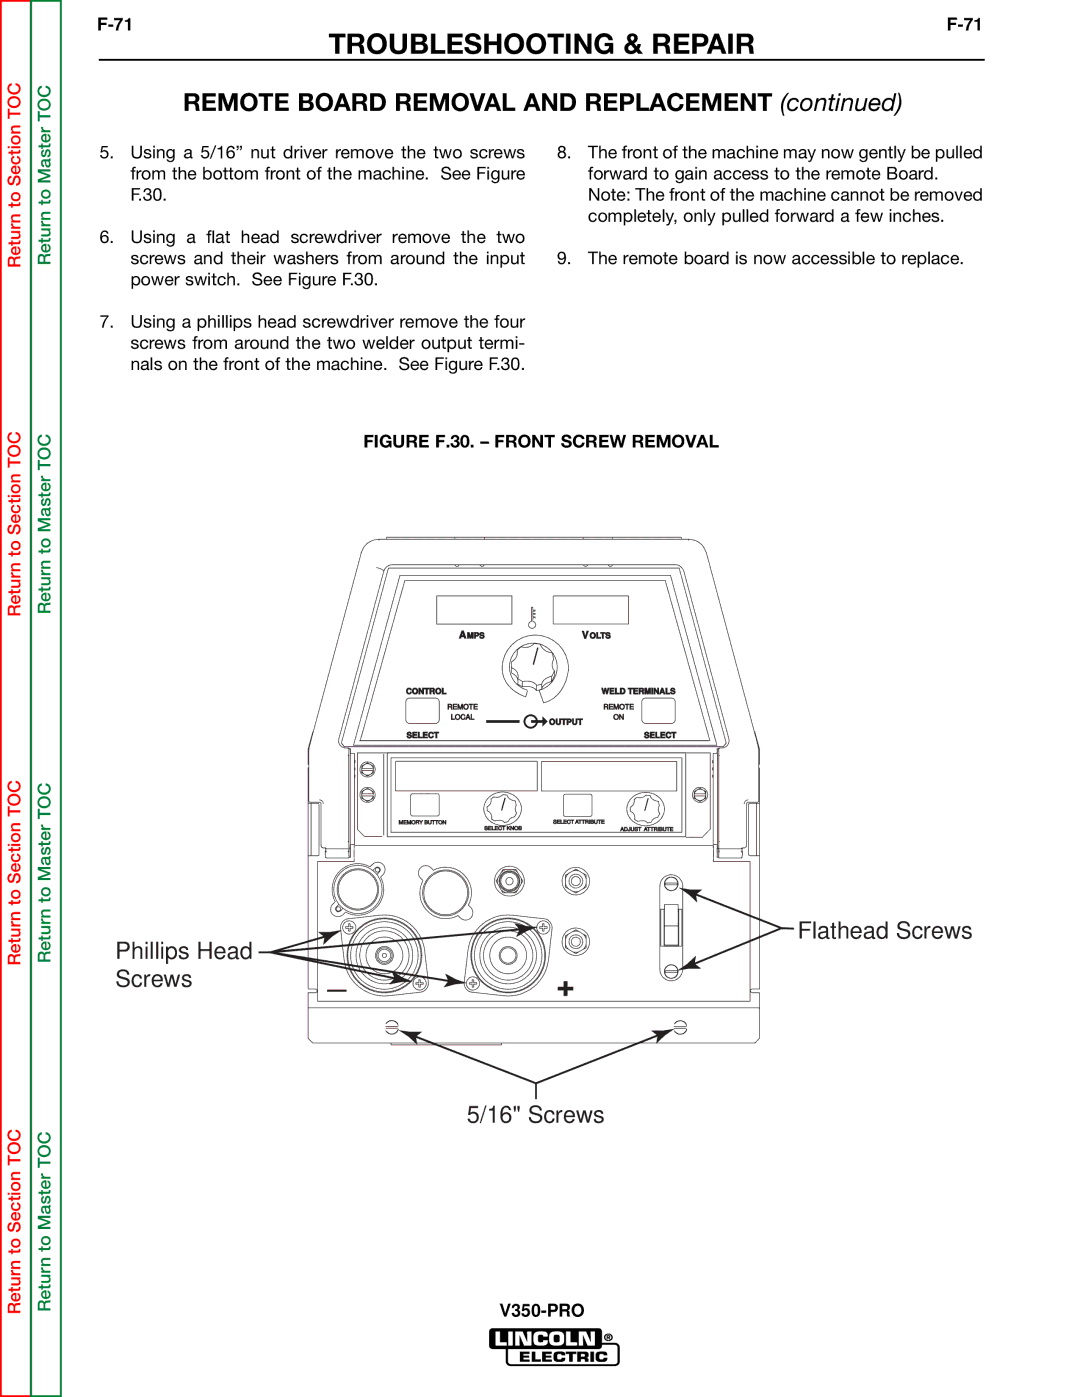 Lincoln Electric SVM158-A service manual Remote Board Removal and Replacement 